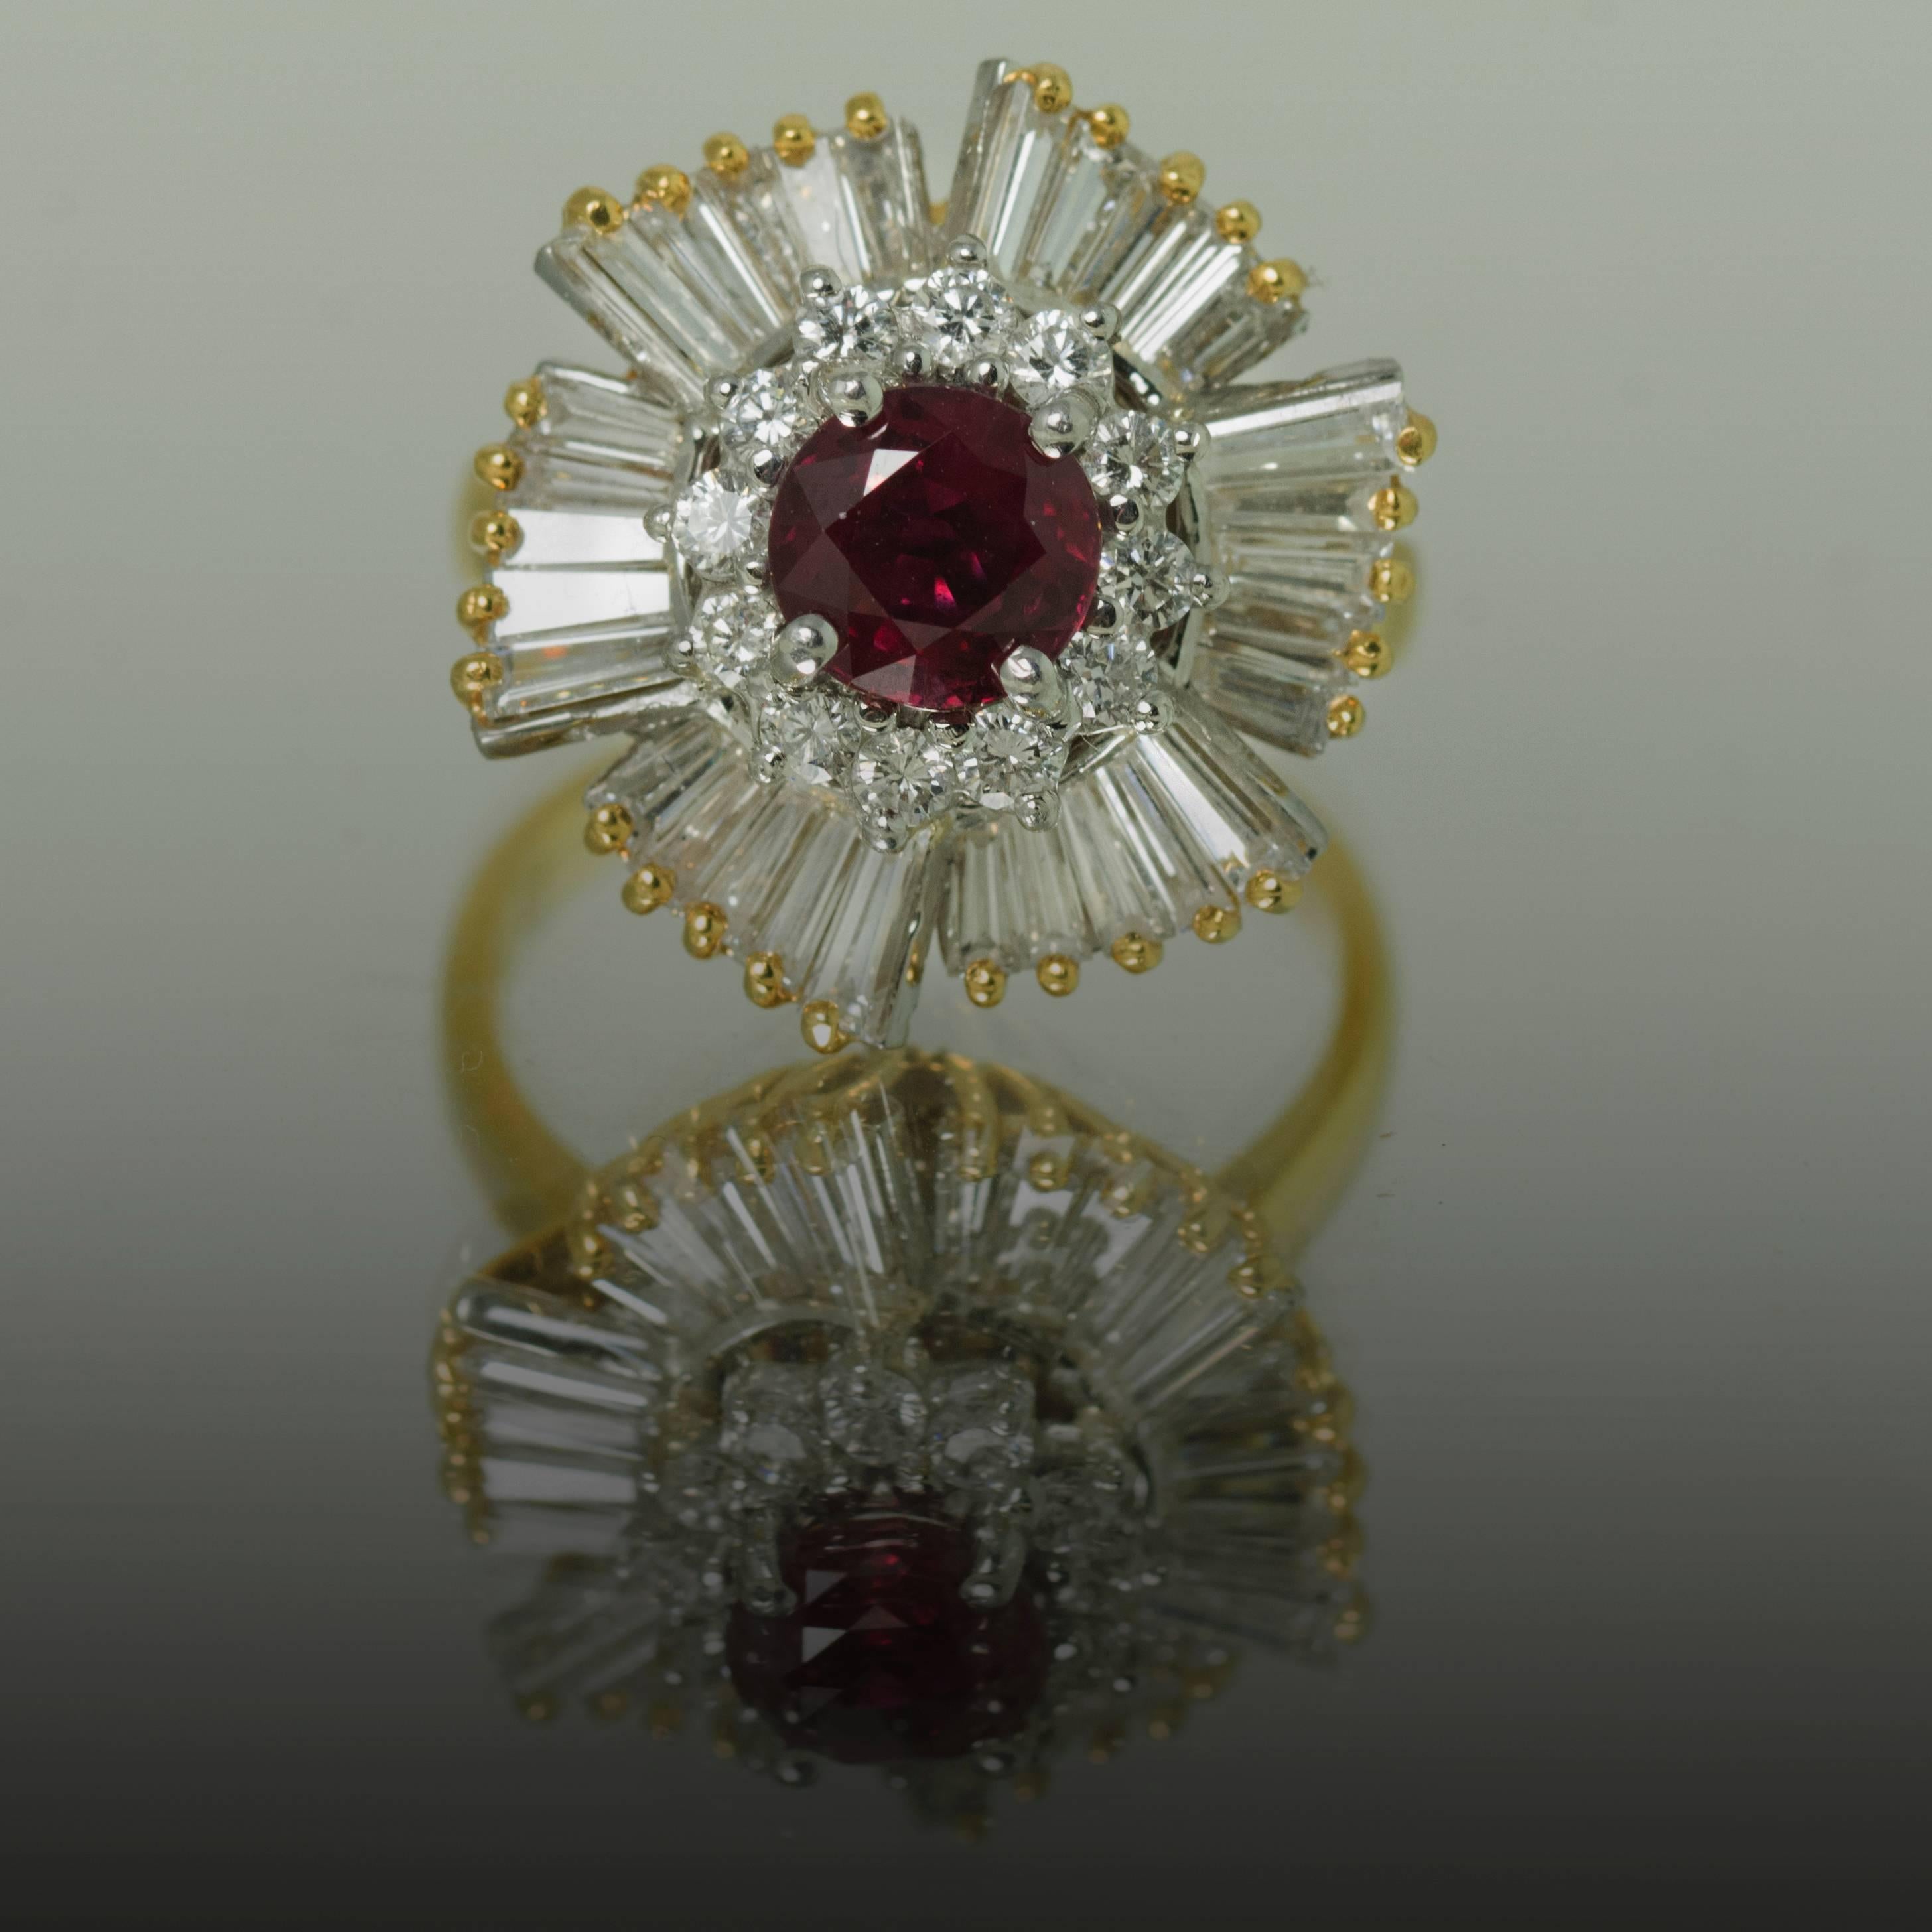 18K Ruby Ring, 1 Deep Red, Very clean Thai Ruby Weighing 1.25 Carats and 42 Diamonds Weighing 2.15 Carats. 